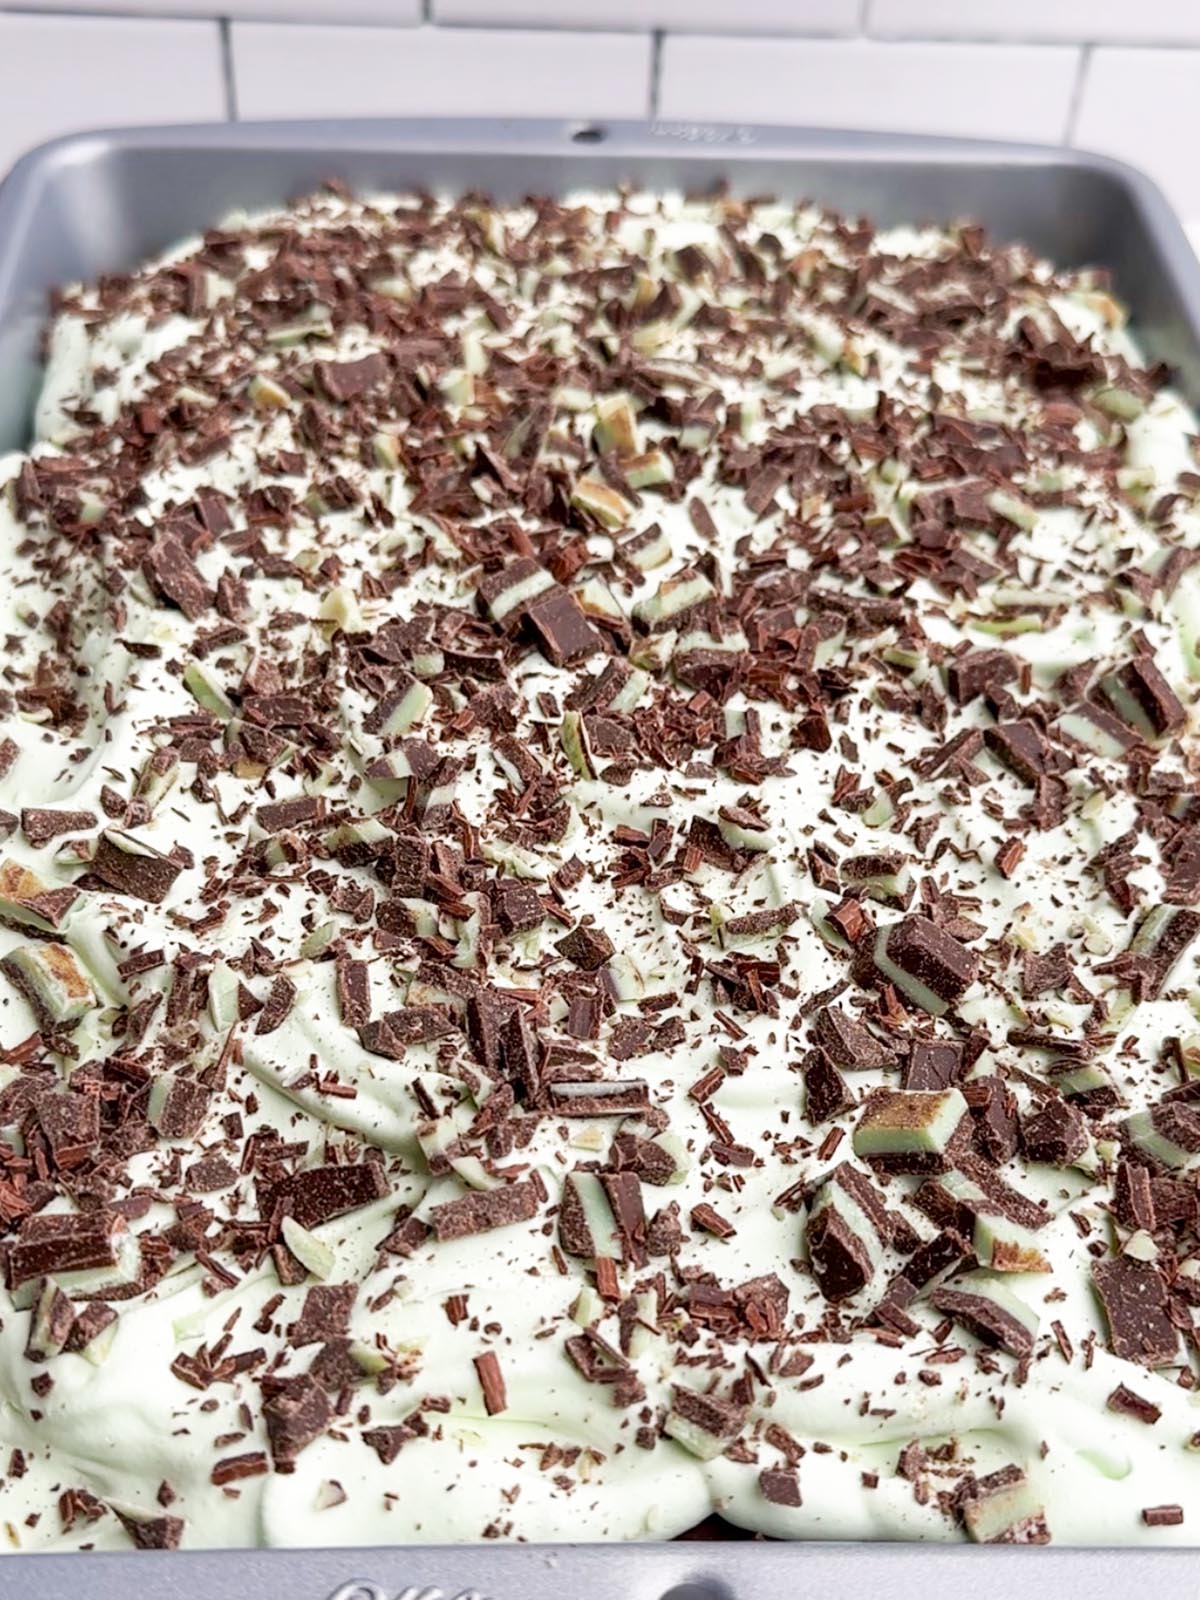 mint chocolate cake with green Cool Whip and Andes mints on top